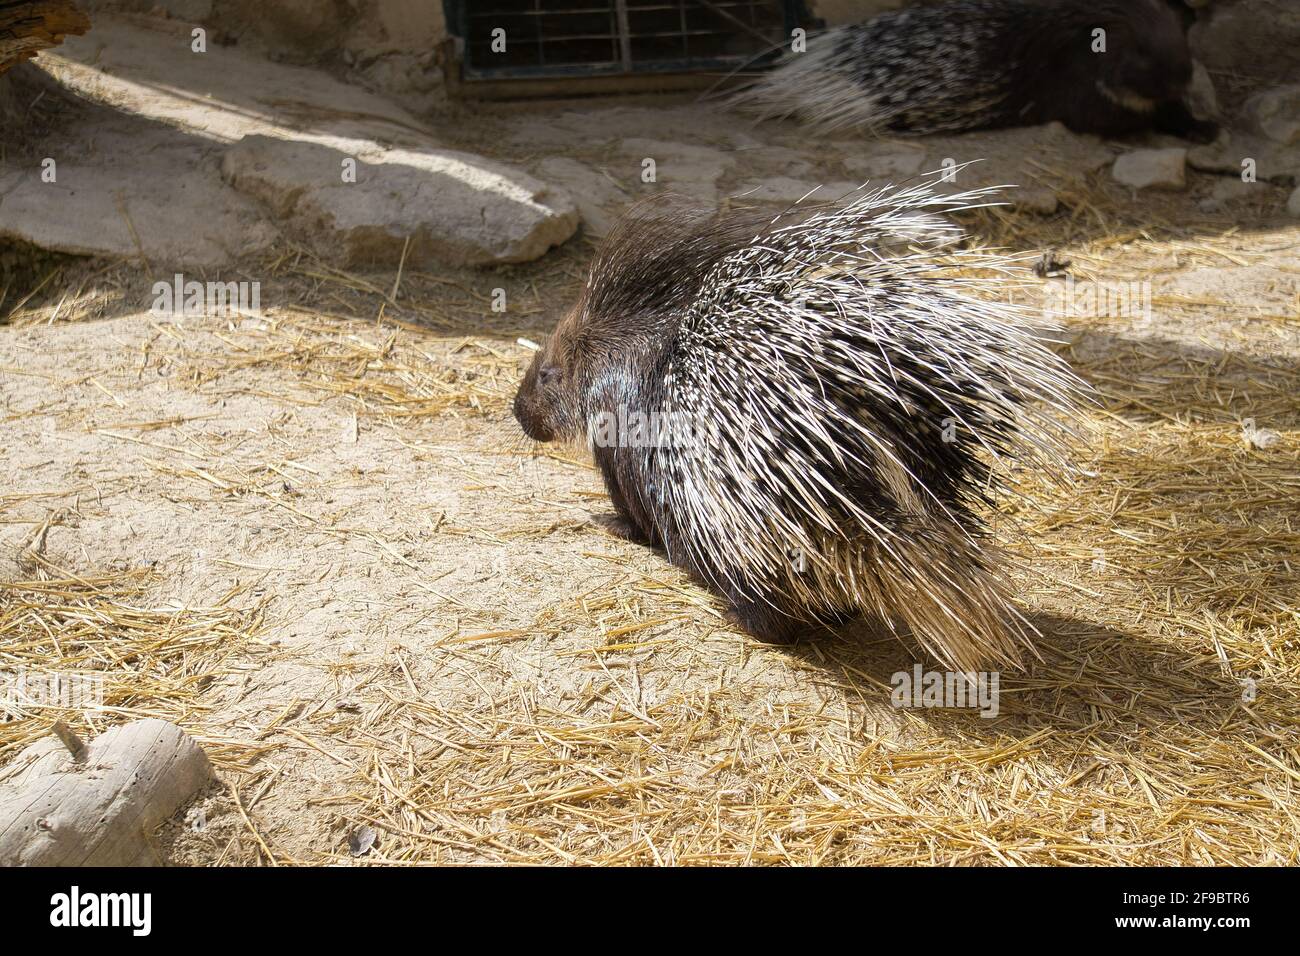 porcupine in a natural park and animal reserve, located in the Sierra de Aitana, Alicante, Spain. rodent Stock Photo